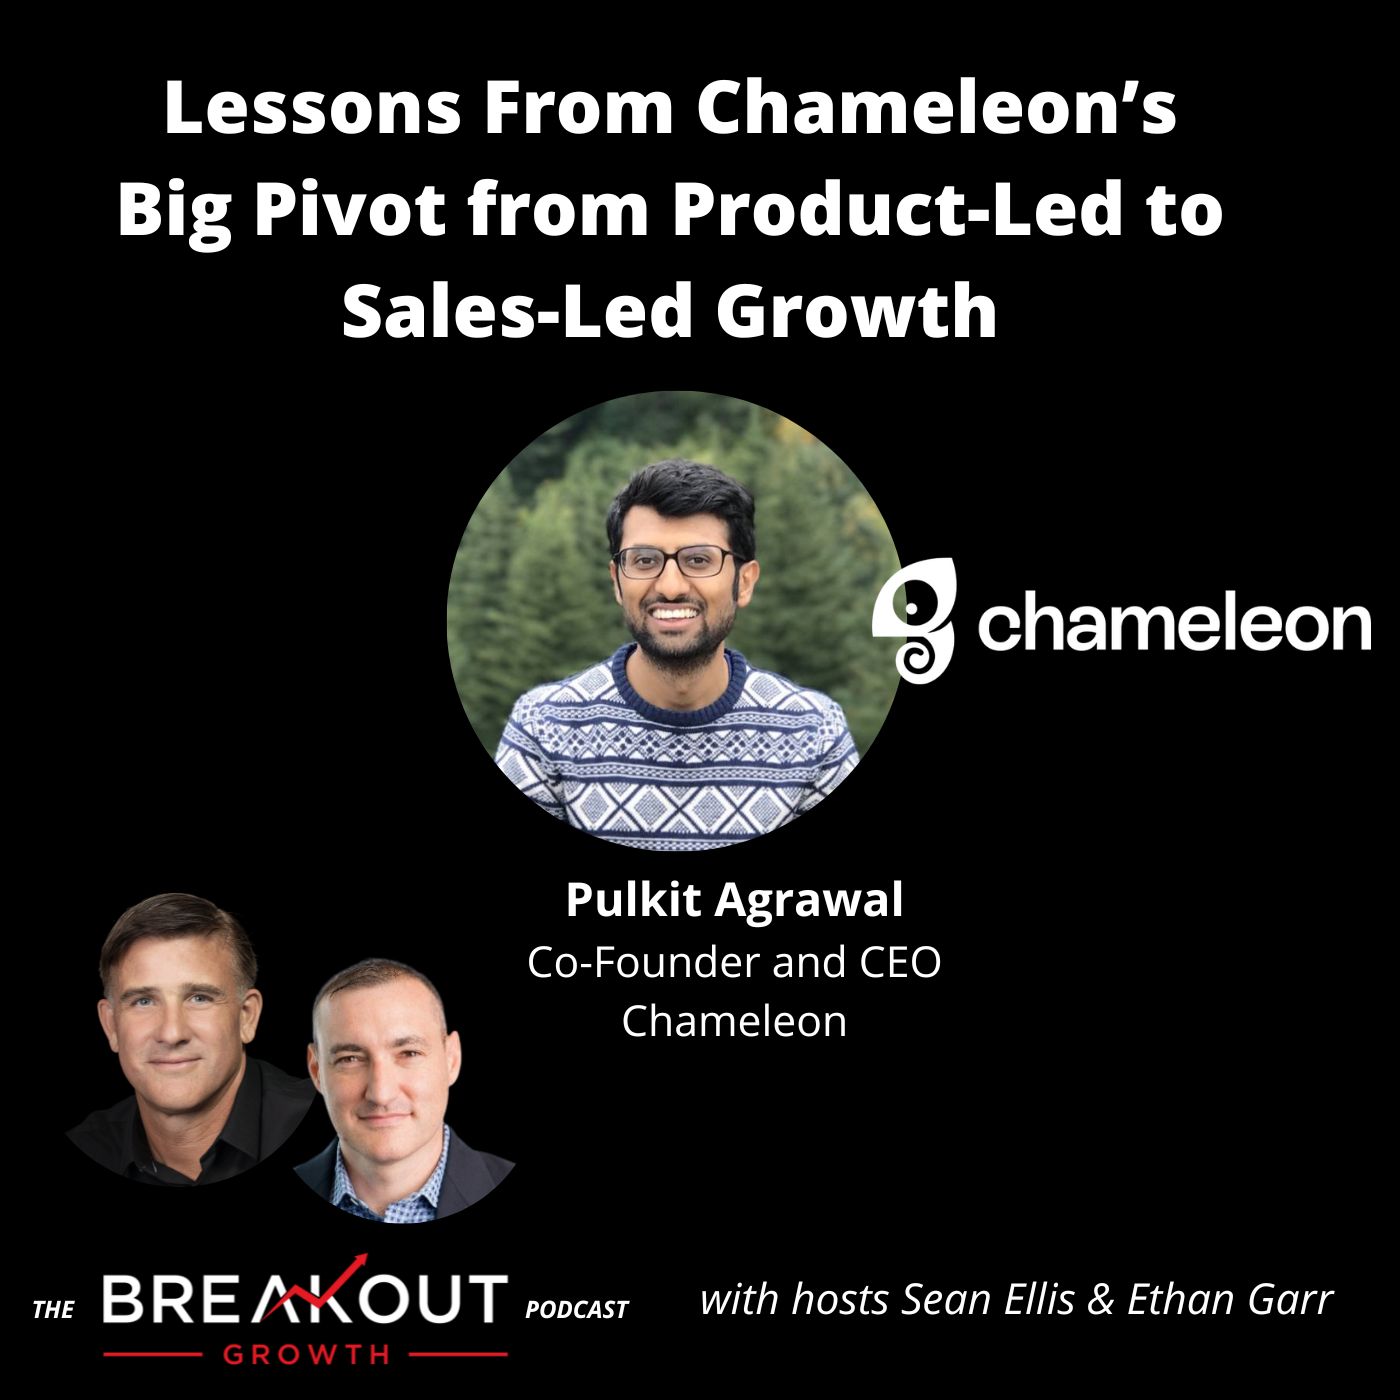 Lessons From Chameleon’s Big Pivot from Product-Led to Sales-Led Growth